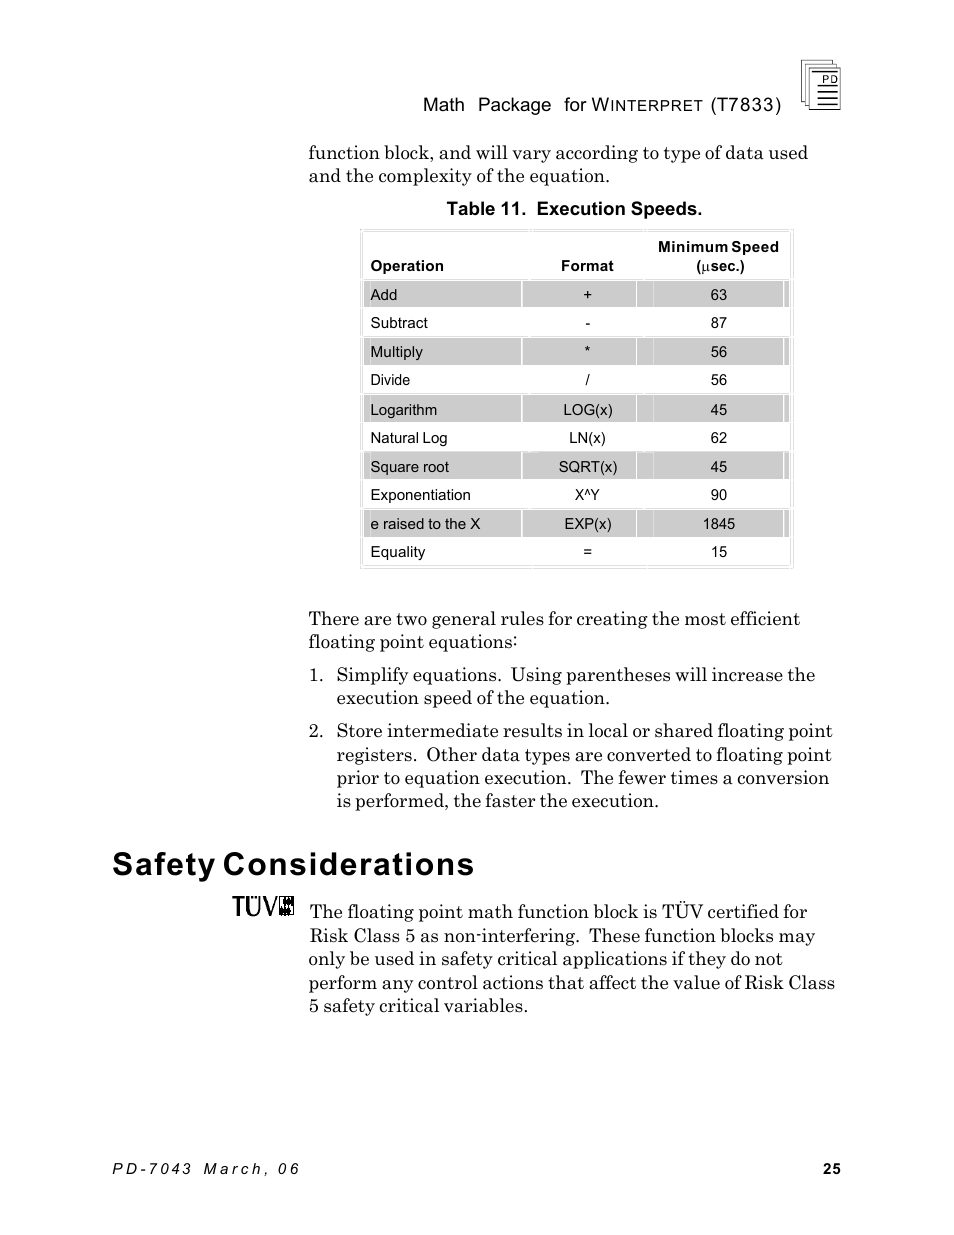 Safety considerations | Rockwell Automation T7833 ICS Regent+Plus Math Package for Winternet User Manual | Page 25 / 26